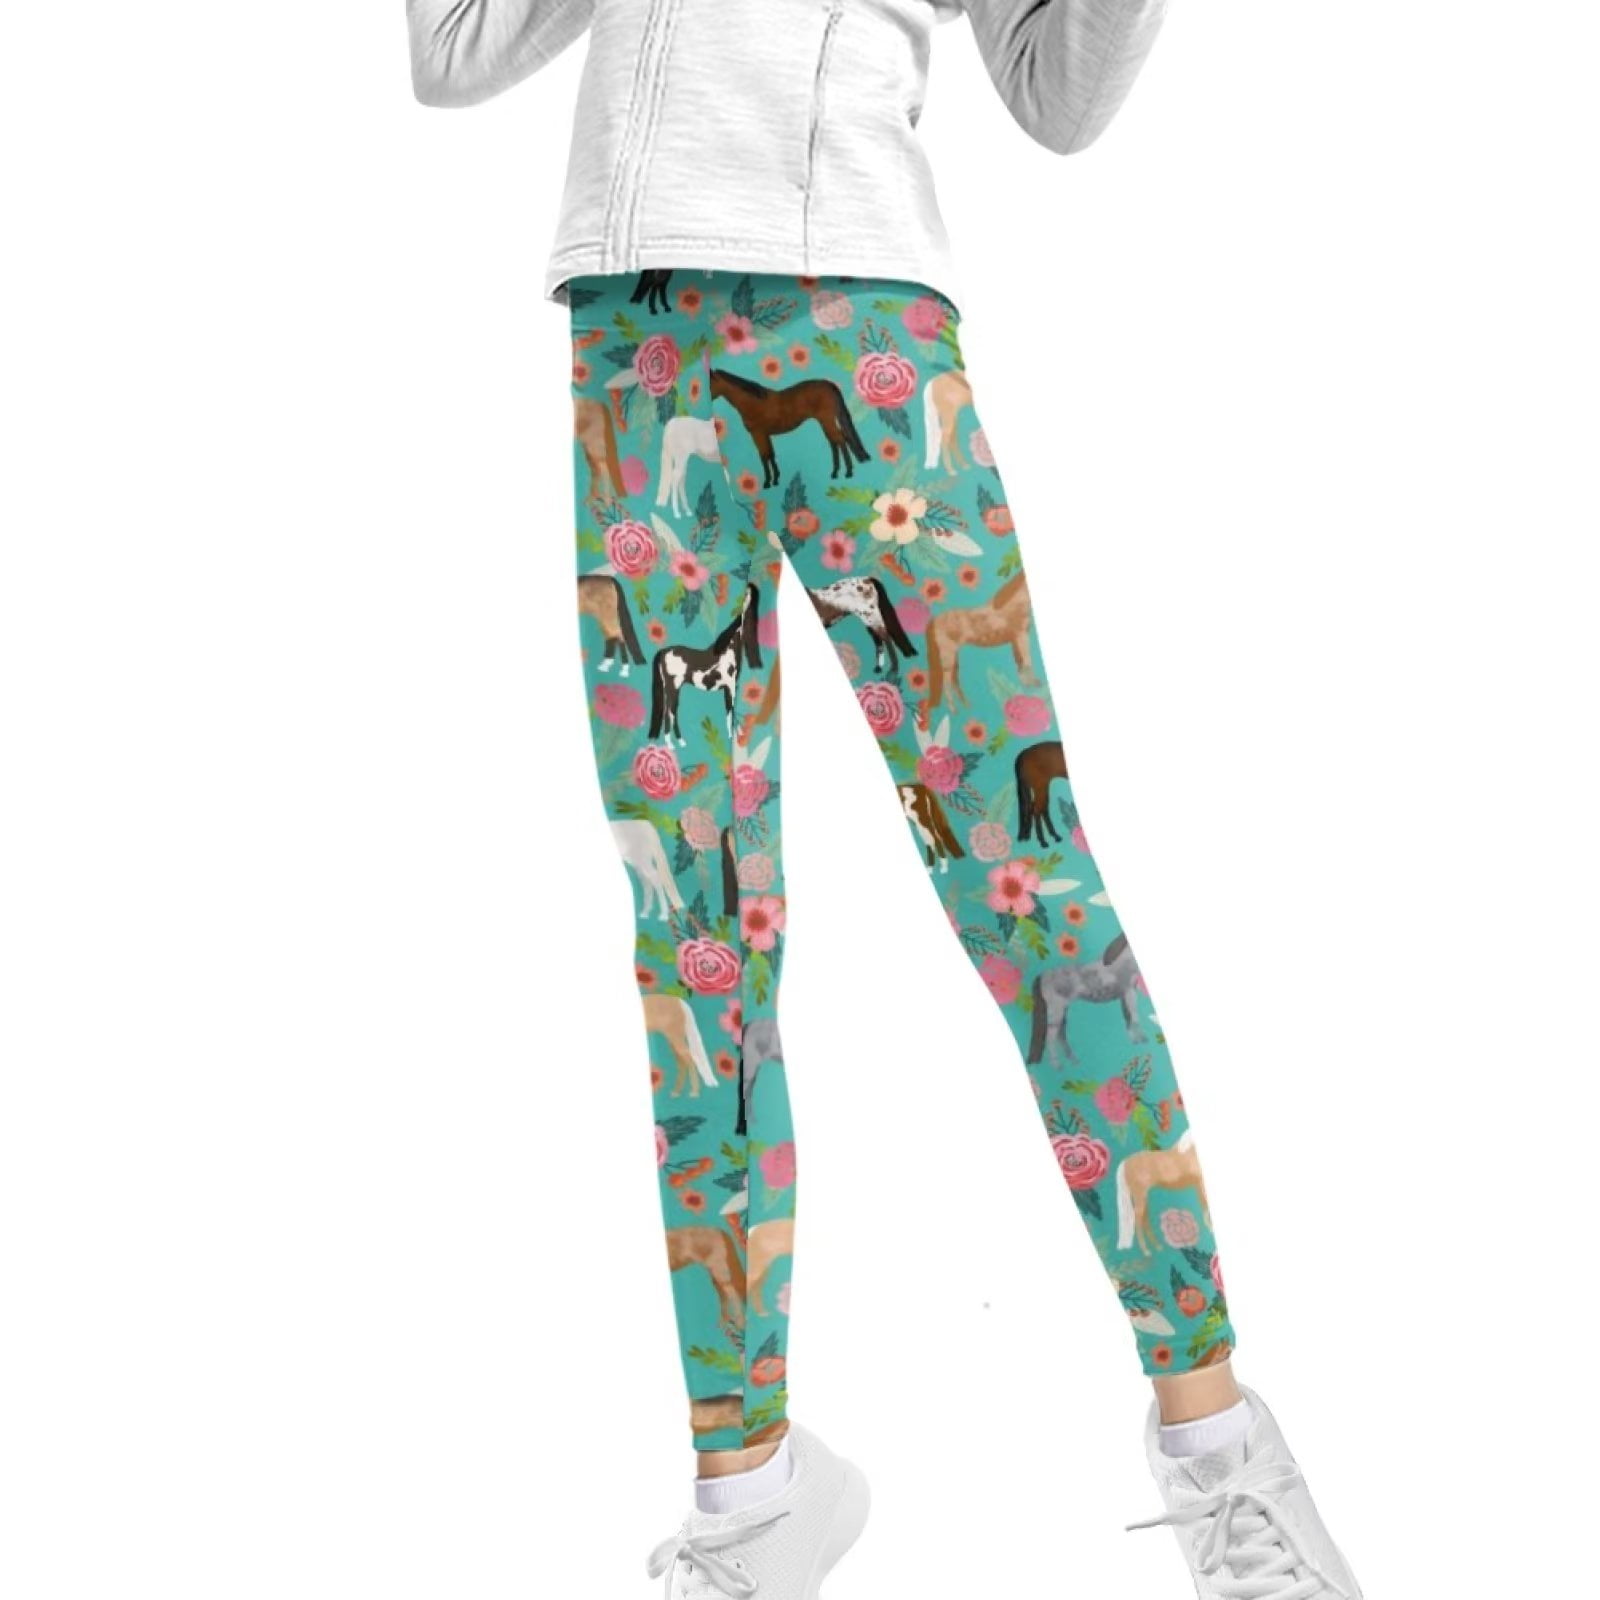 FKELYI Floral Horse Girls Legging for Children Size 4-5 Years